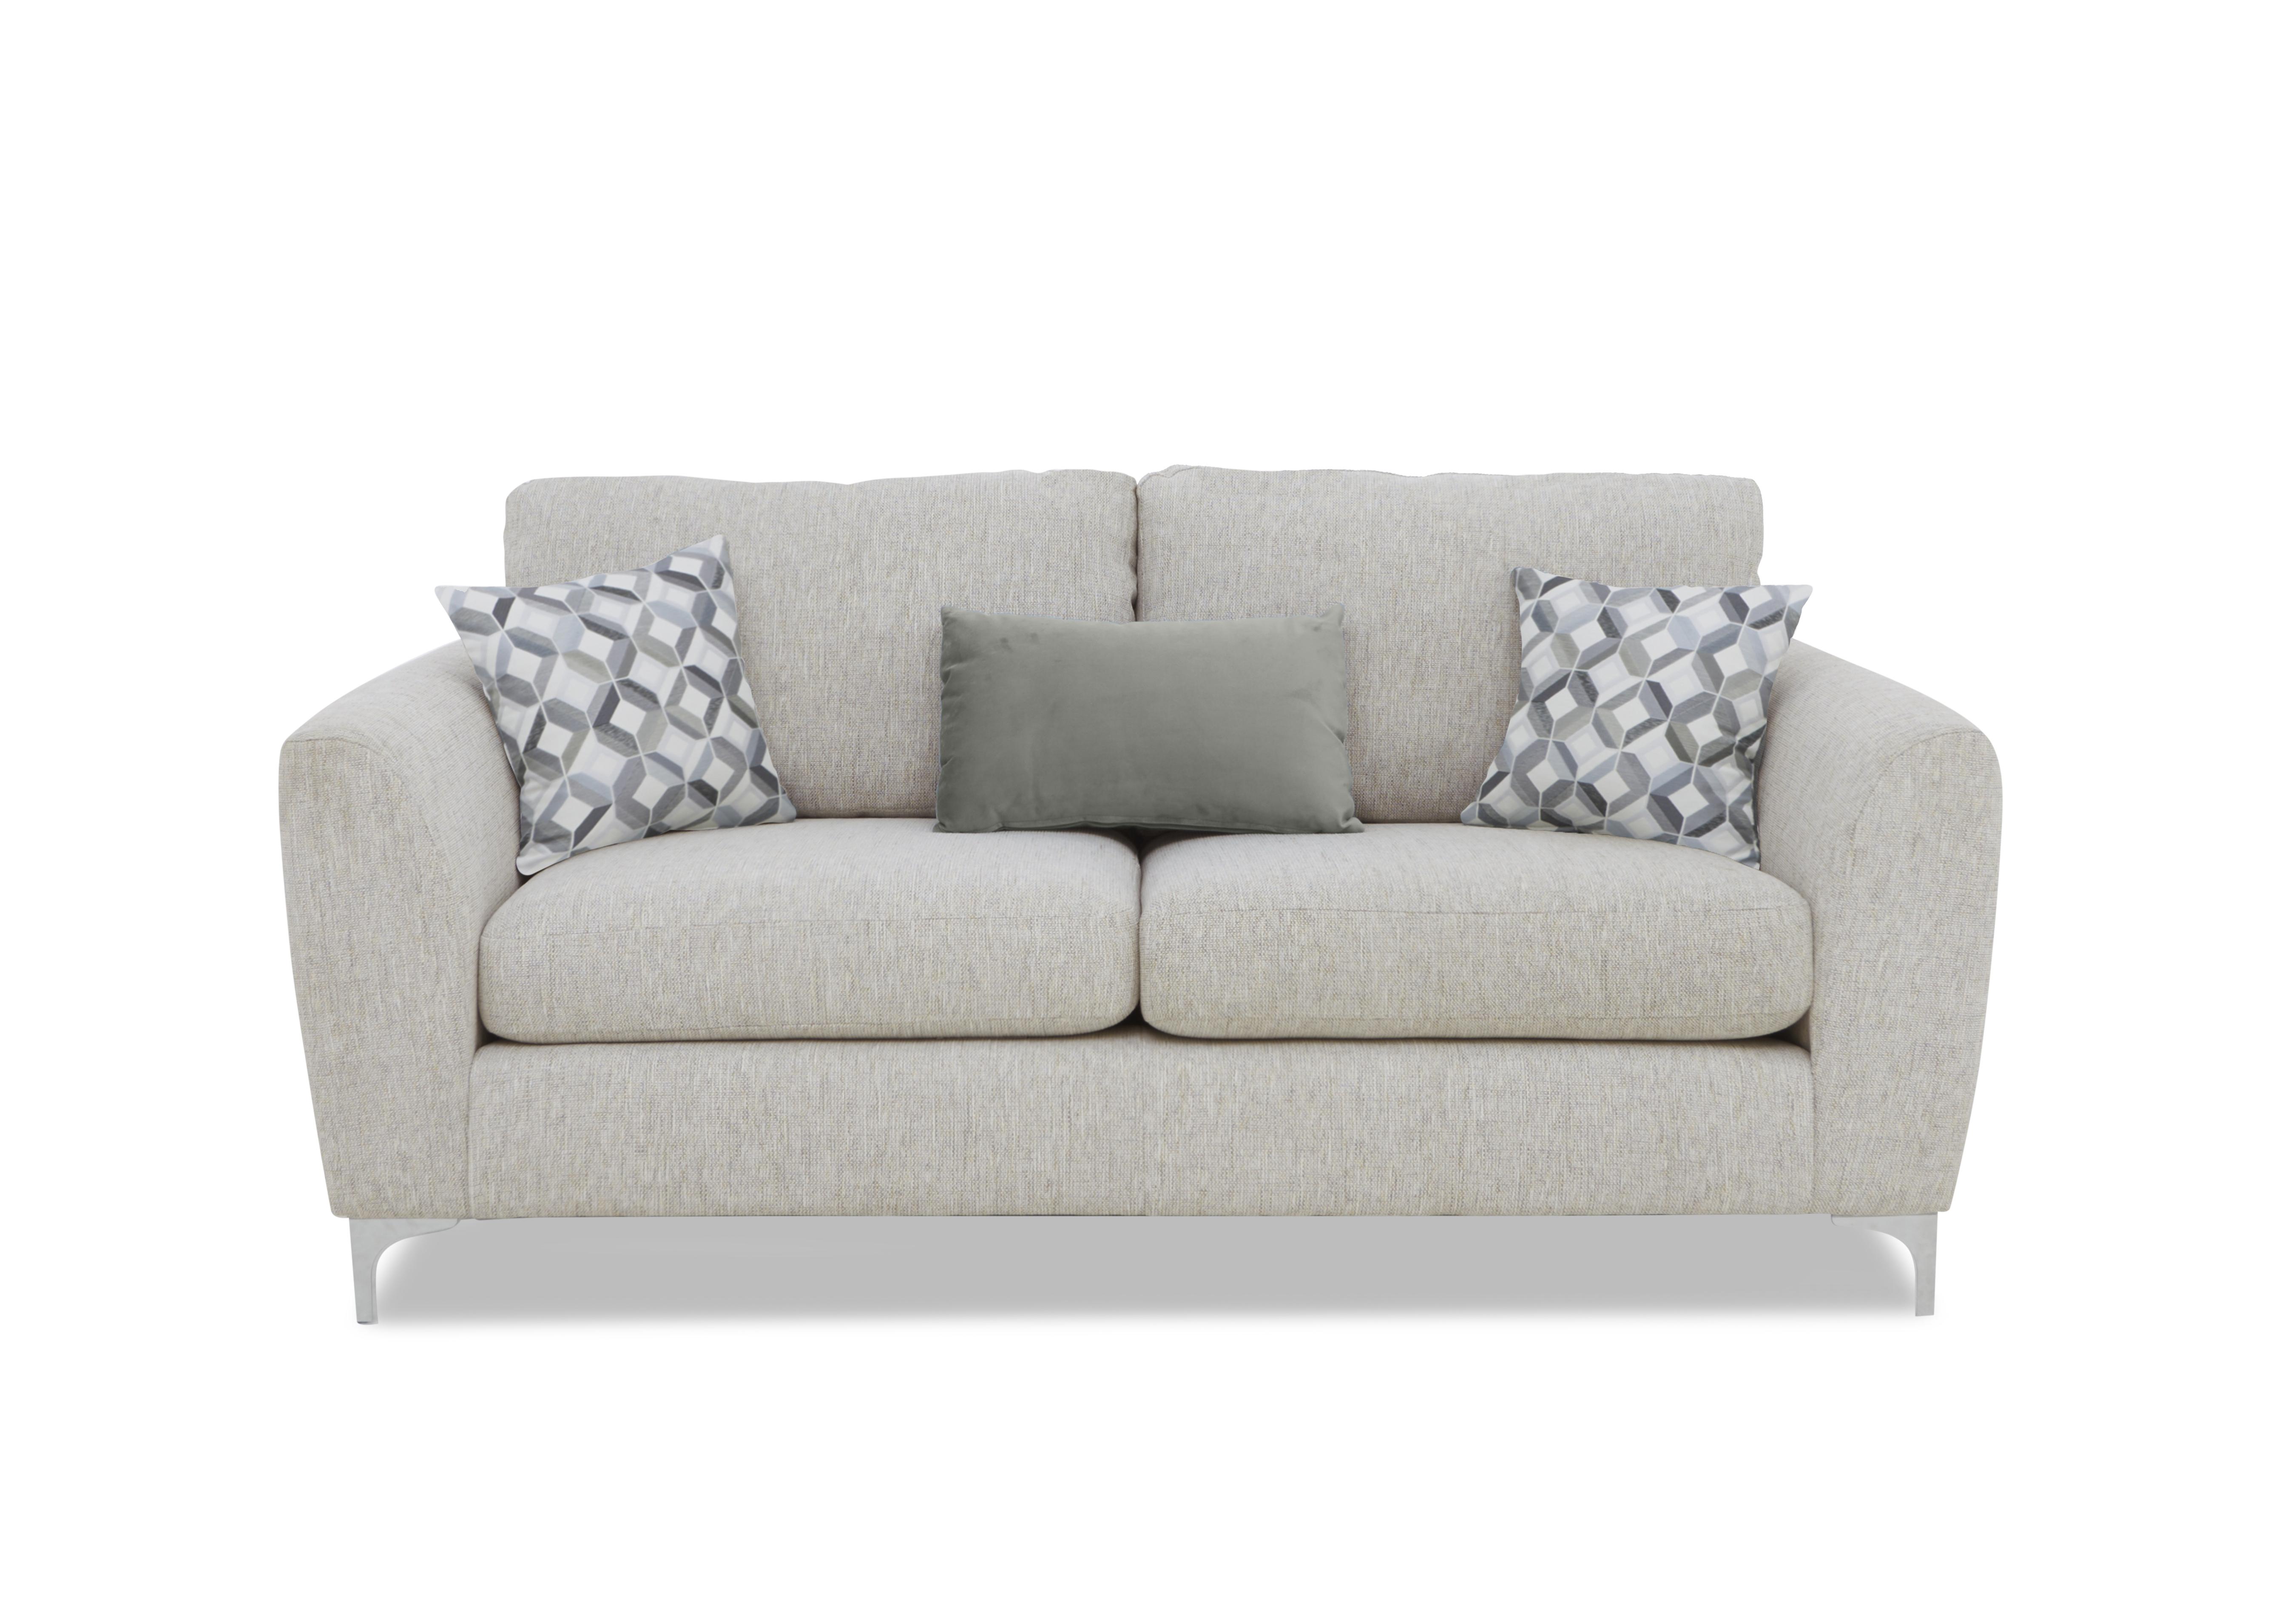 Pippa 3 Seater Fabric Sofa in Clay Ebony Ch Ft on Furniture Village